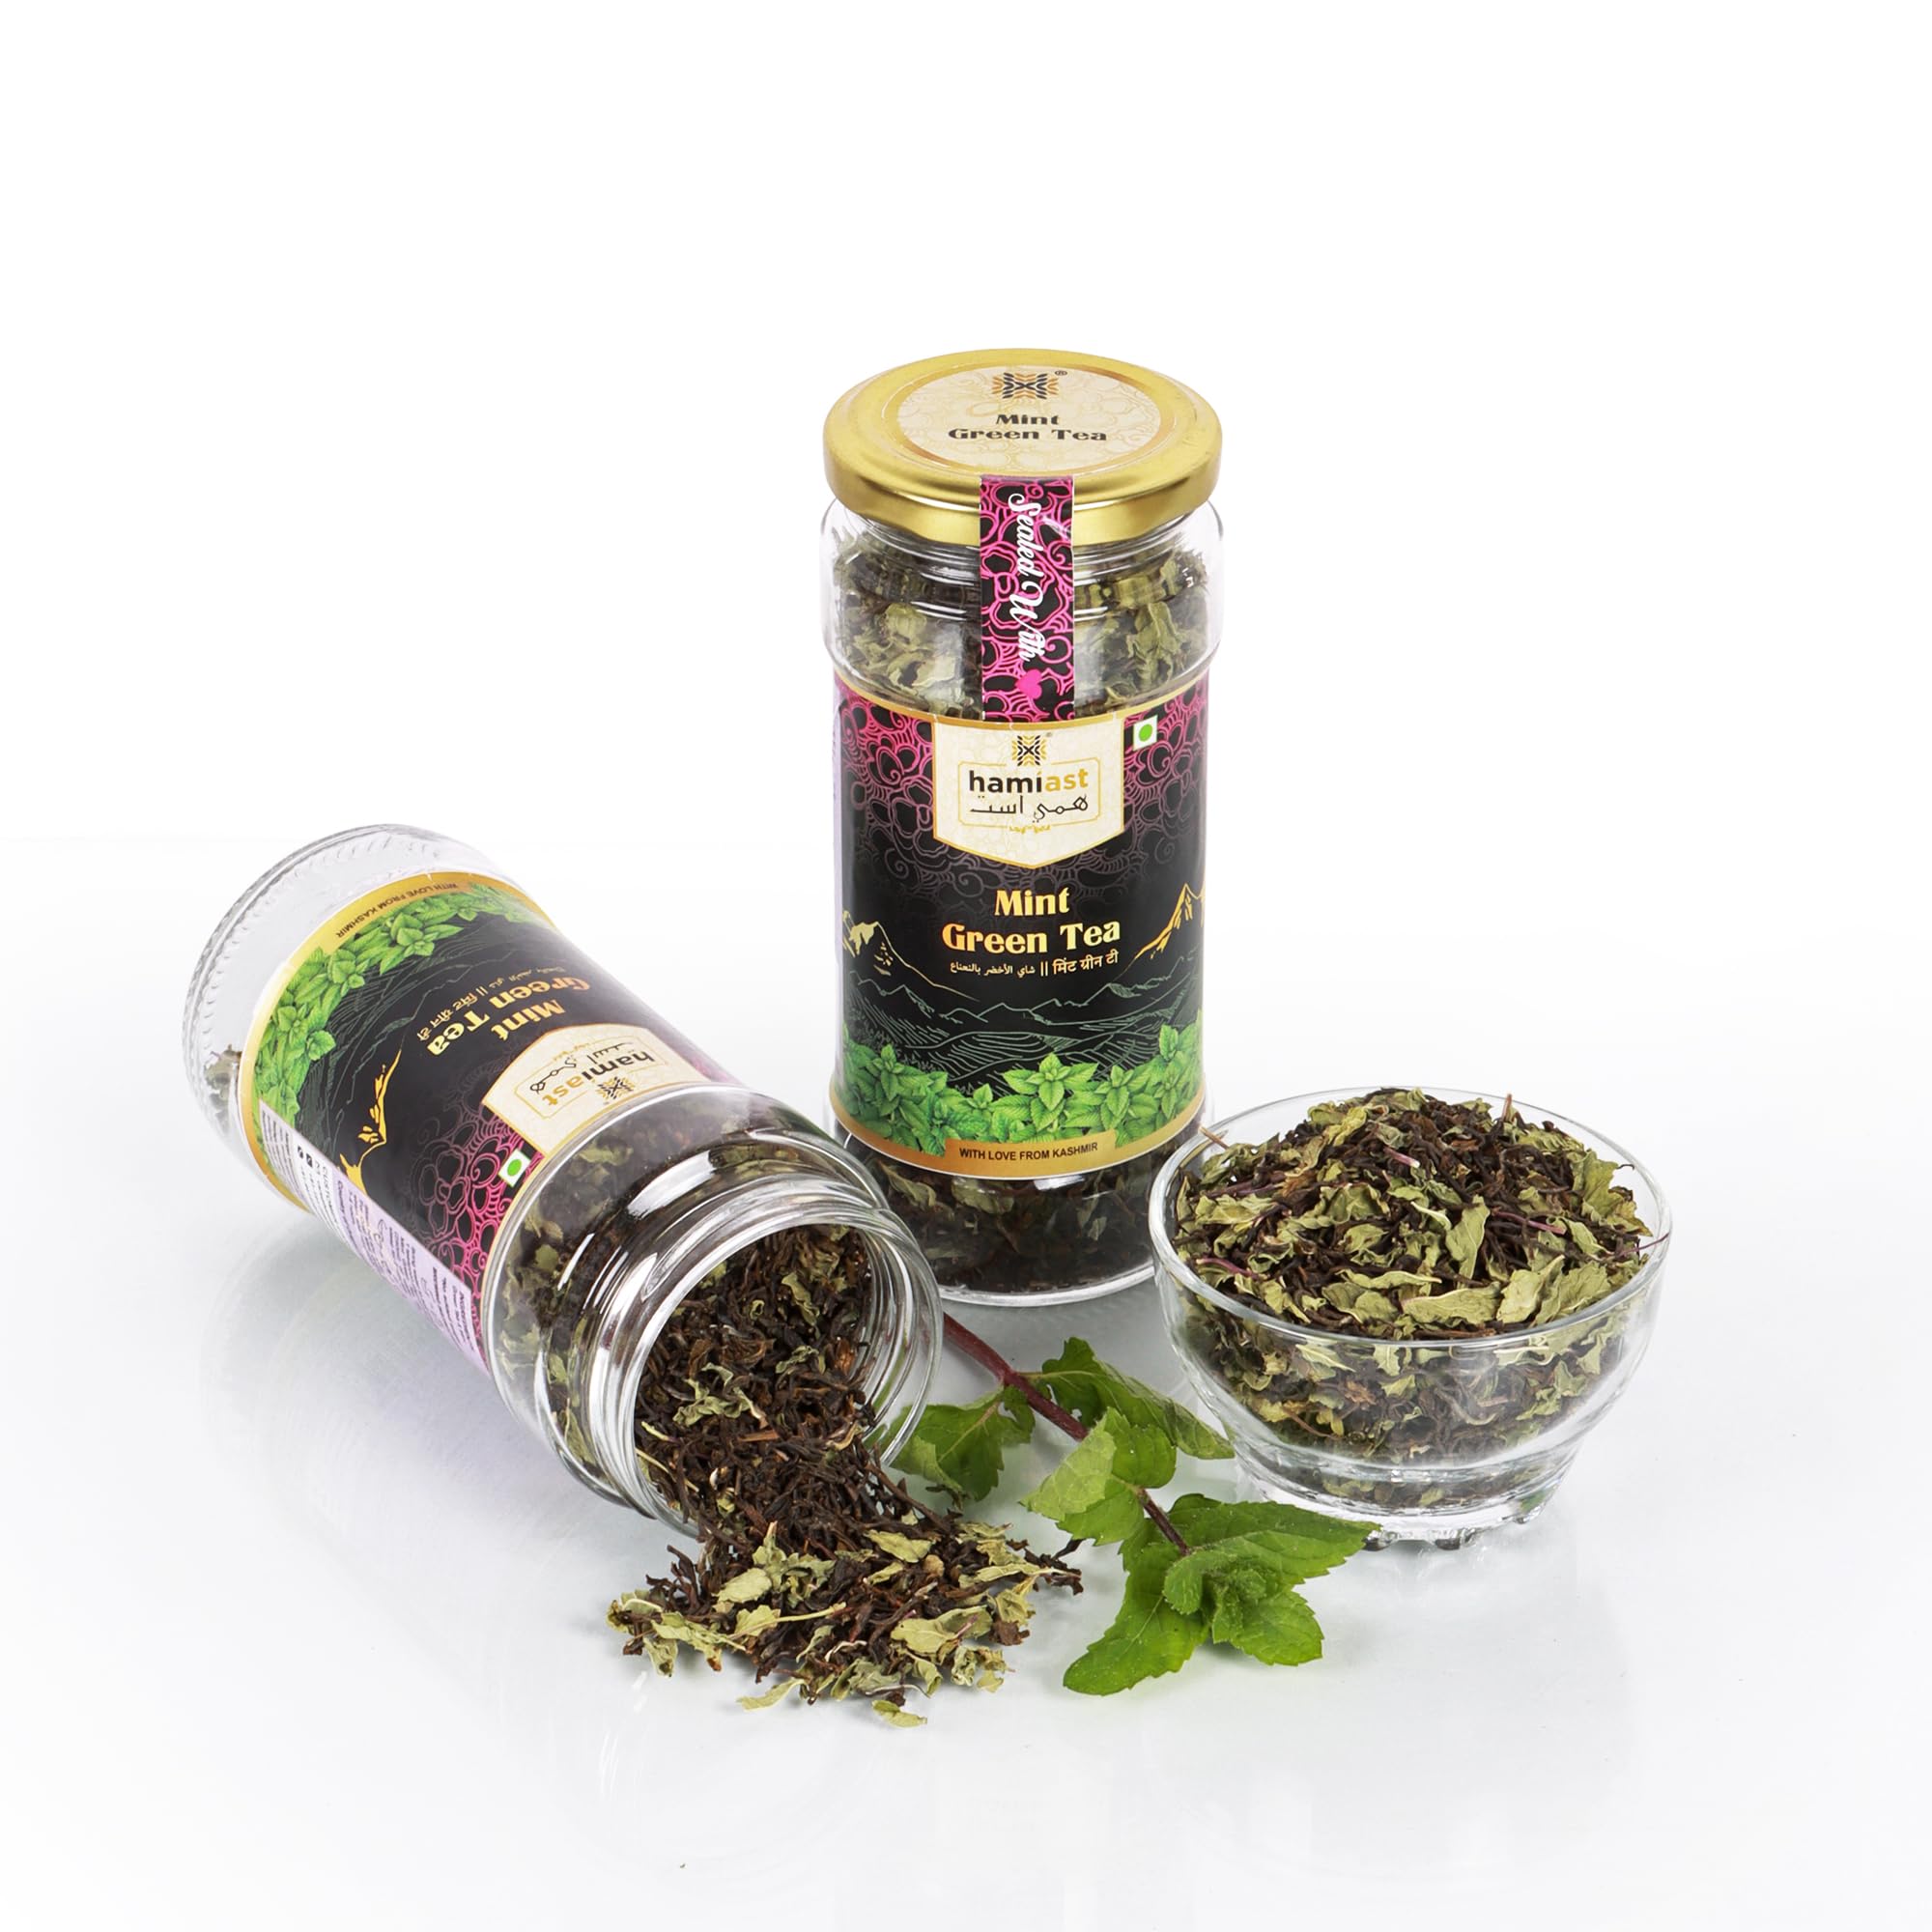 Hamiast Himalayan Mint Green Tea | 100% Natural, No Added Flavor, Loose Leaf | Refreshing from the Himalayas 75 Grams Serves 50 Cups